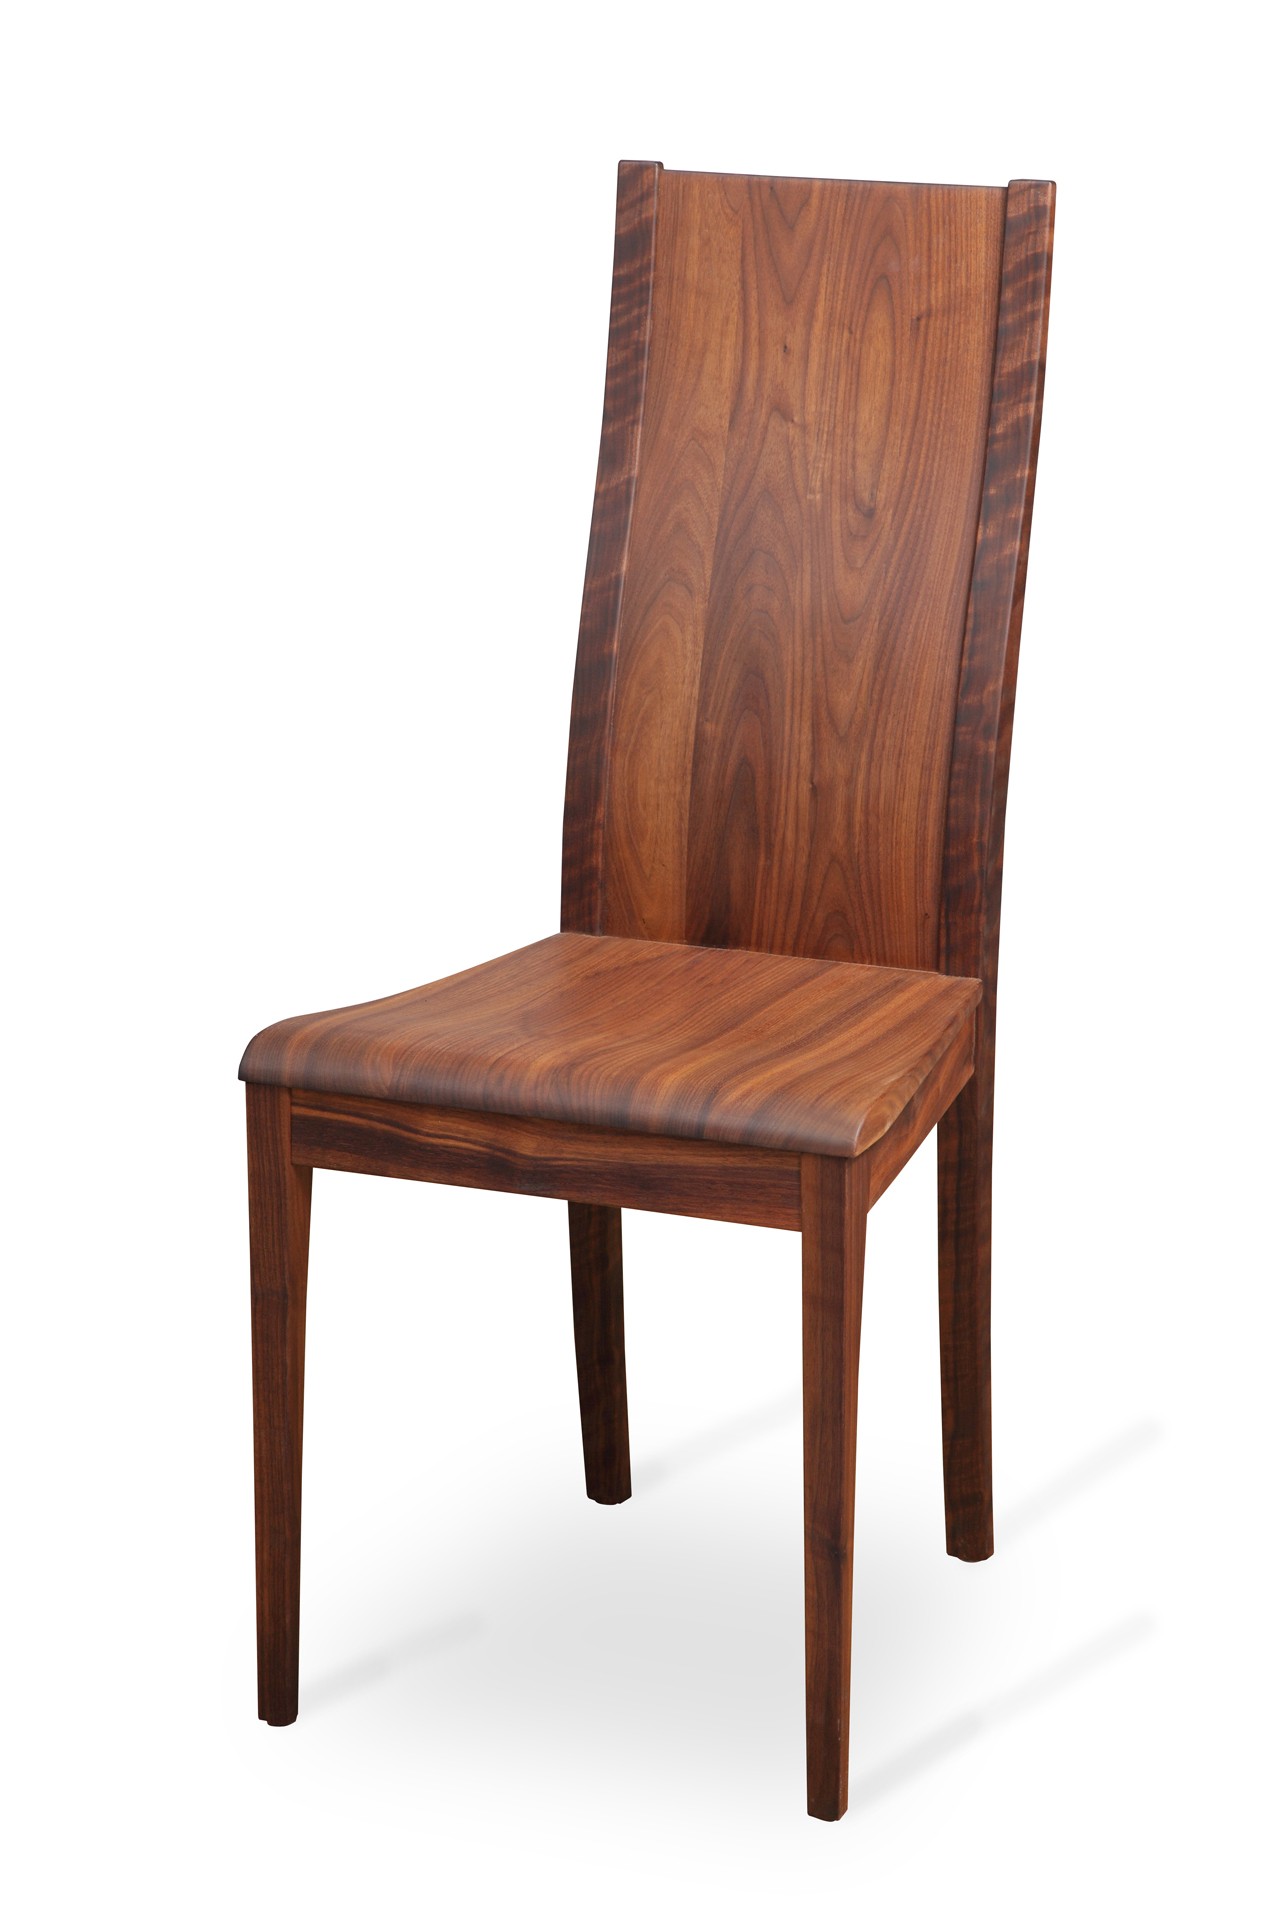 ARCA CHAIR WHOLLY WOODEN